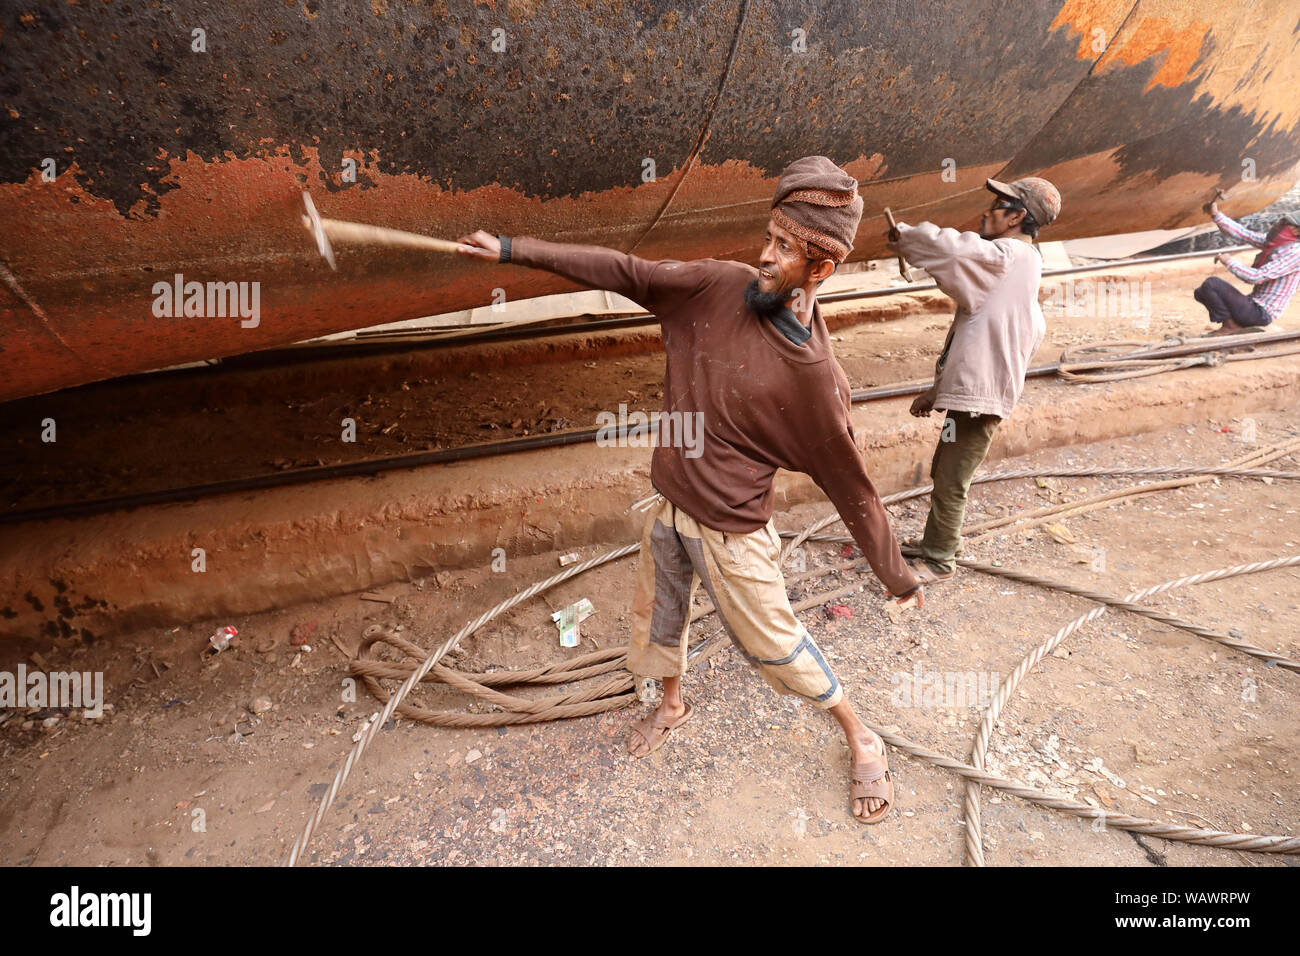 Dock workers in a shipyard in Dhaka, Bangladesh. Shipbuilding in Bangladesh has become a major industry in recent years. Stock Photo